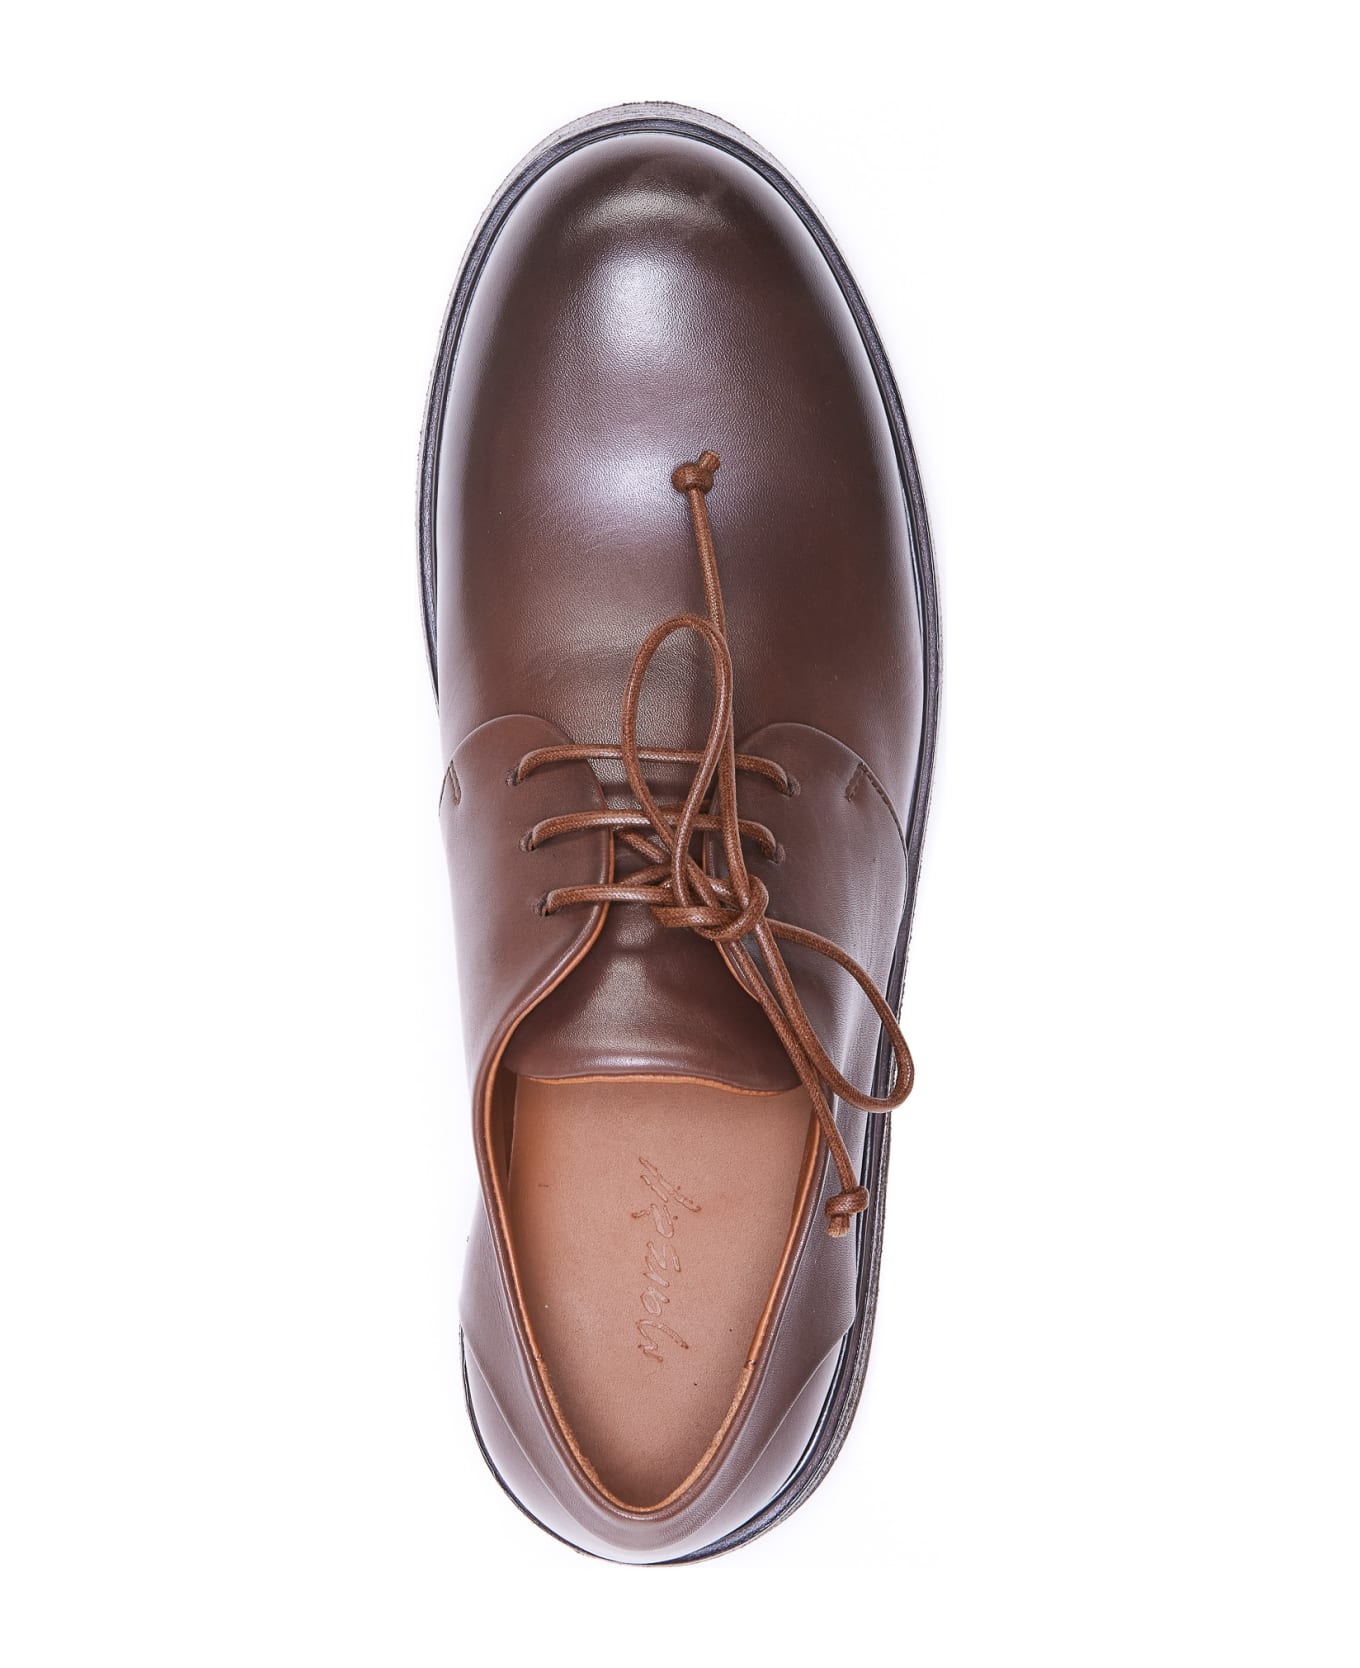 Marsell Zucclolona Derby Lace Up Shoes - Brown